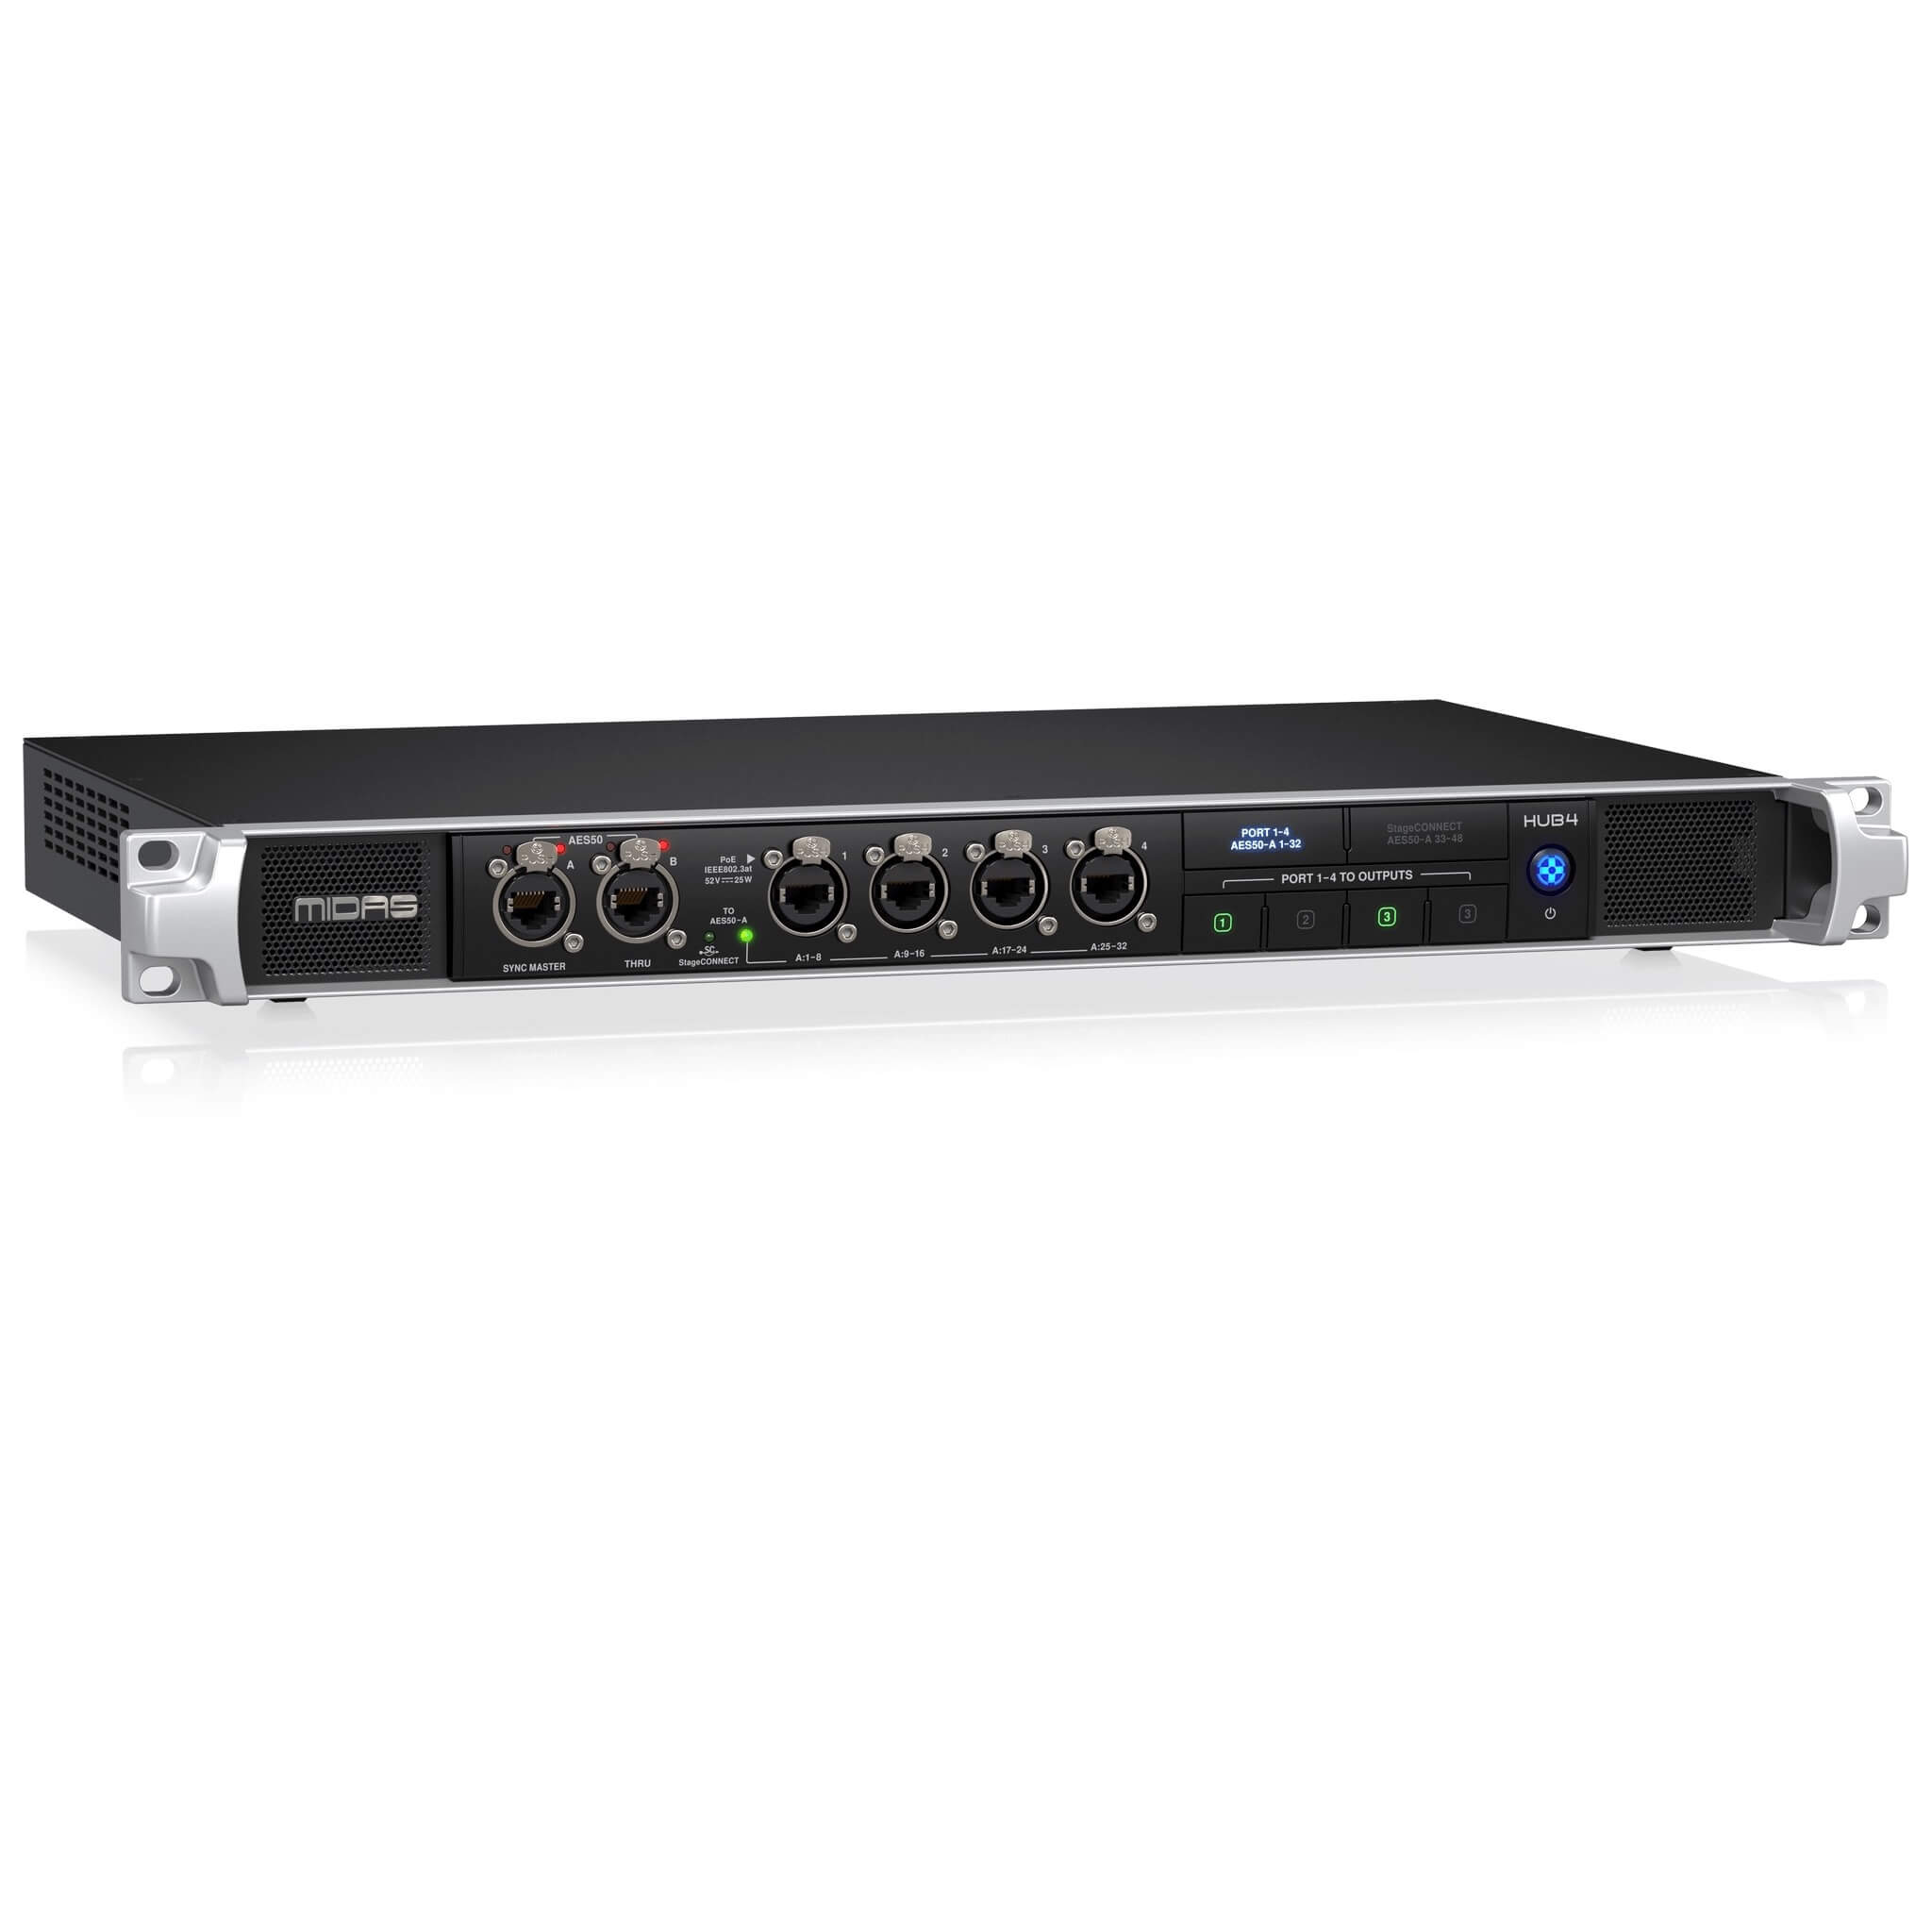 Midas HUB4 - Monitor System Hub with 4 PoE Ports for Personal Mixers, left